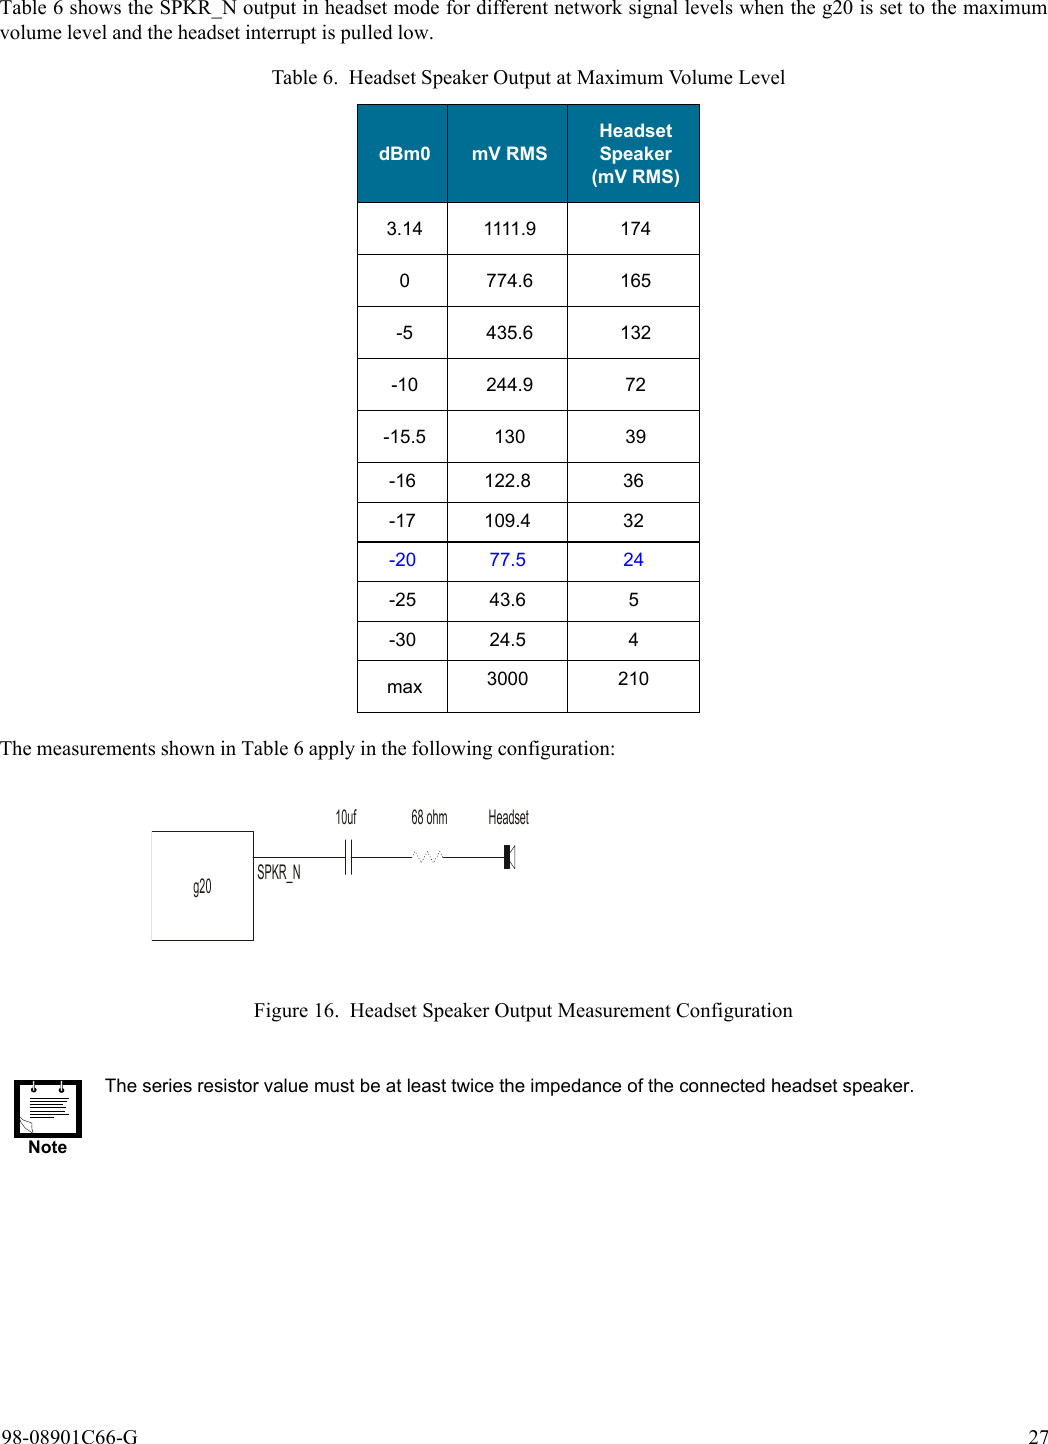 98-08901C66-G 27Table 6 shows the SPKR_N output in headset mode for different network signal levels when the g20 is set to the maximumvolume level and the headset interrupt is pulled low.The measurements shown in Table 6 apply in the following configuration:Figure 16. Headset Speaker Output Measurement ConfigurationTable 6. Headset Speaker Output at Maximum Volume LeveldBm0 mV RMSHeadset Speaker(mV RMS)3.14 1111.9 1740 774.6 165-5 435.6 132-10 244.9 72-15.5 130 39-16 122.8 36-17 109.4 32-20 77.5 24-25 43.6 5-30 24.5 4max 3000 210NoteThe series resistor value must be at least twice the impedance of the connected headset speaker.68 ohm10ufSPKR_Ng20Headset